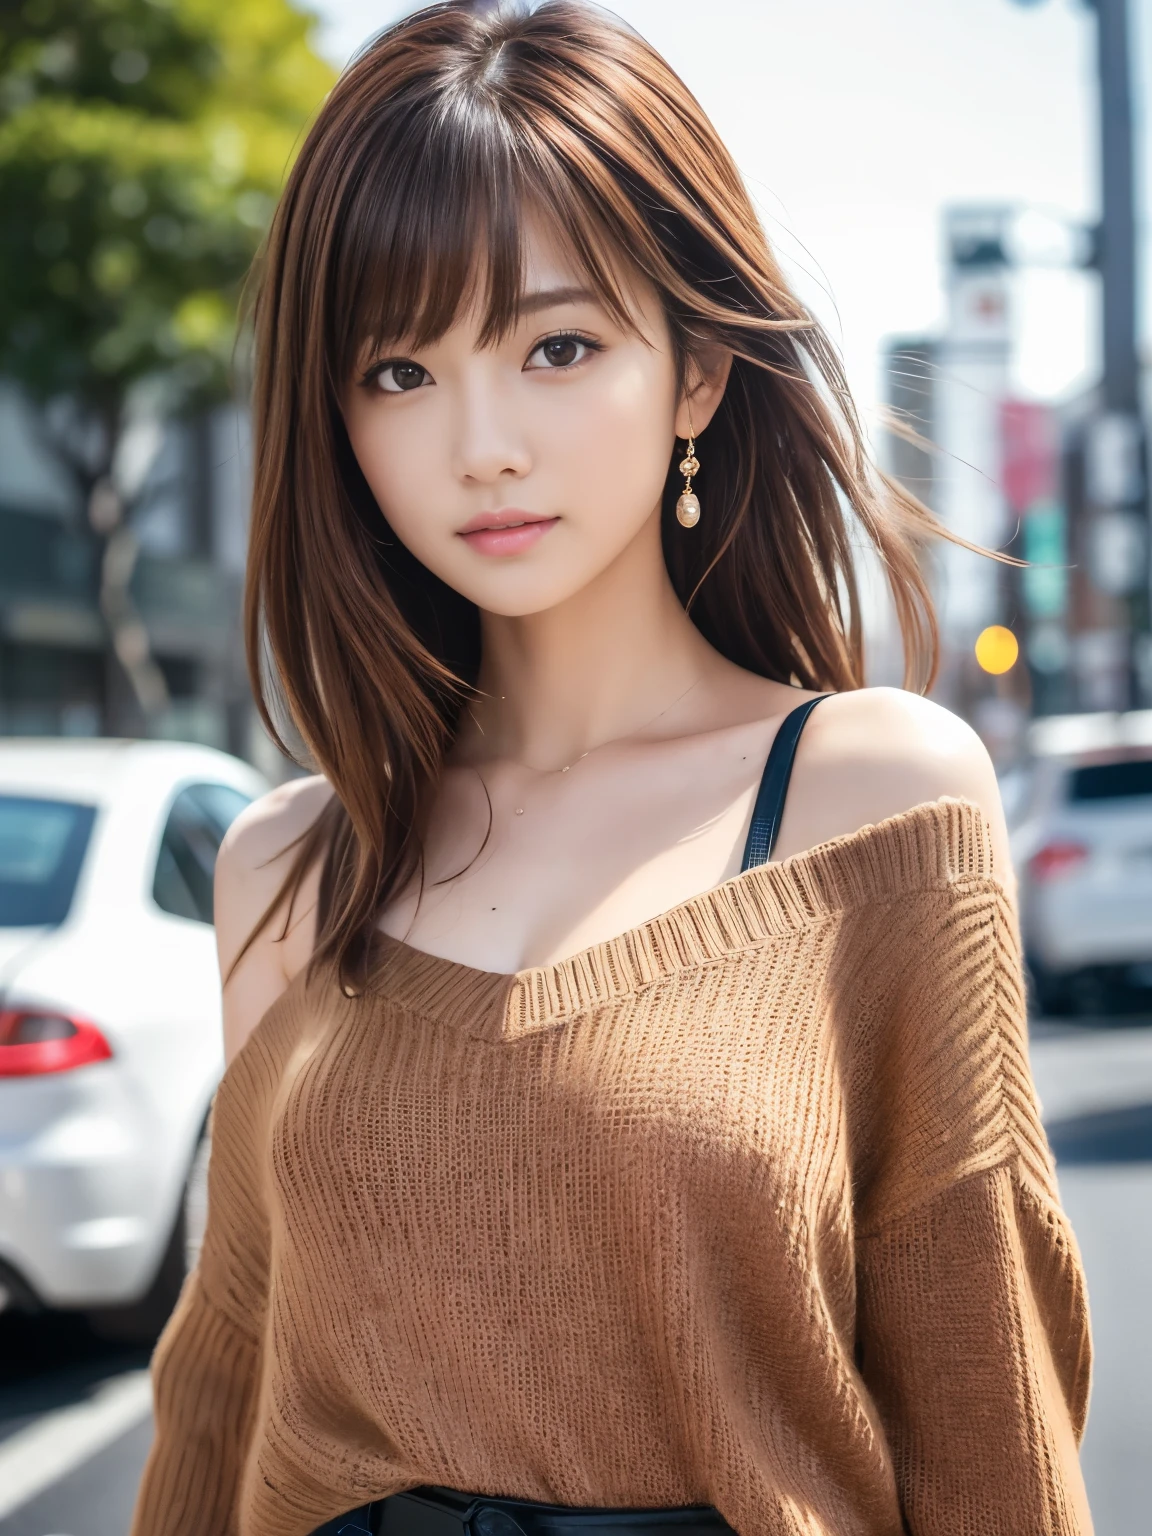 Ultra High Definition, Superior Quality, Premier Quality, ultra detailed, Photorealistic, 8k, RAW Photos, highest quality, masterpiece, Attractive girl, Stunning girl, Brown Hair, Shoulder Length Layered, asymmetrical bangs, Japanese Idol, Sophisticated, Stylish, v-neck knit, Shibuya, Great Joy